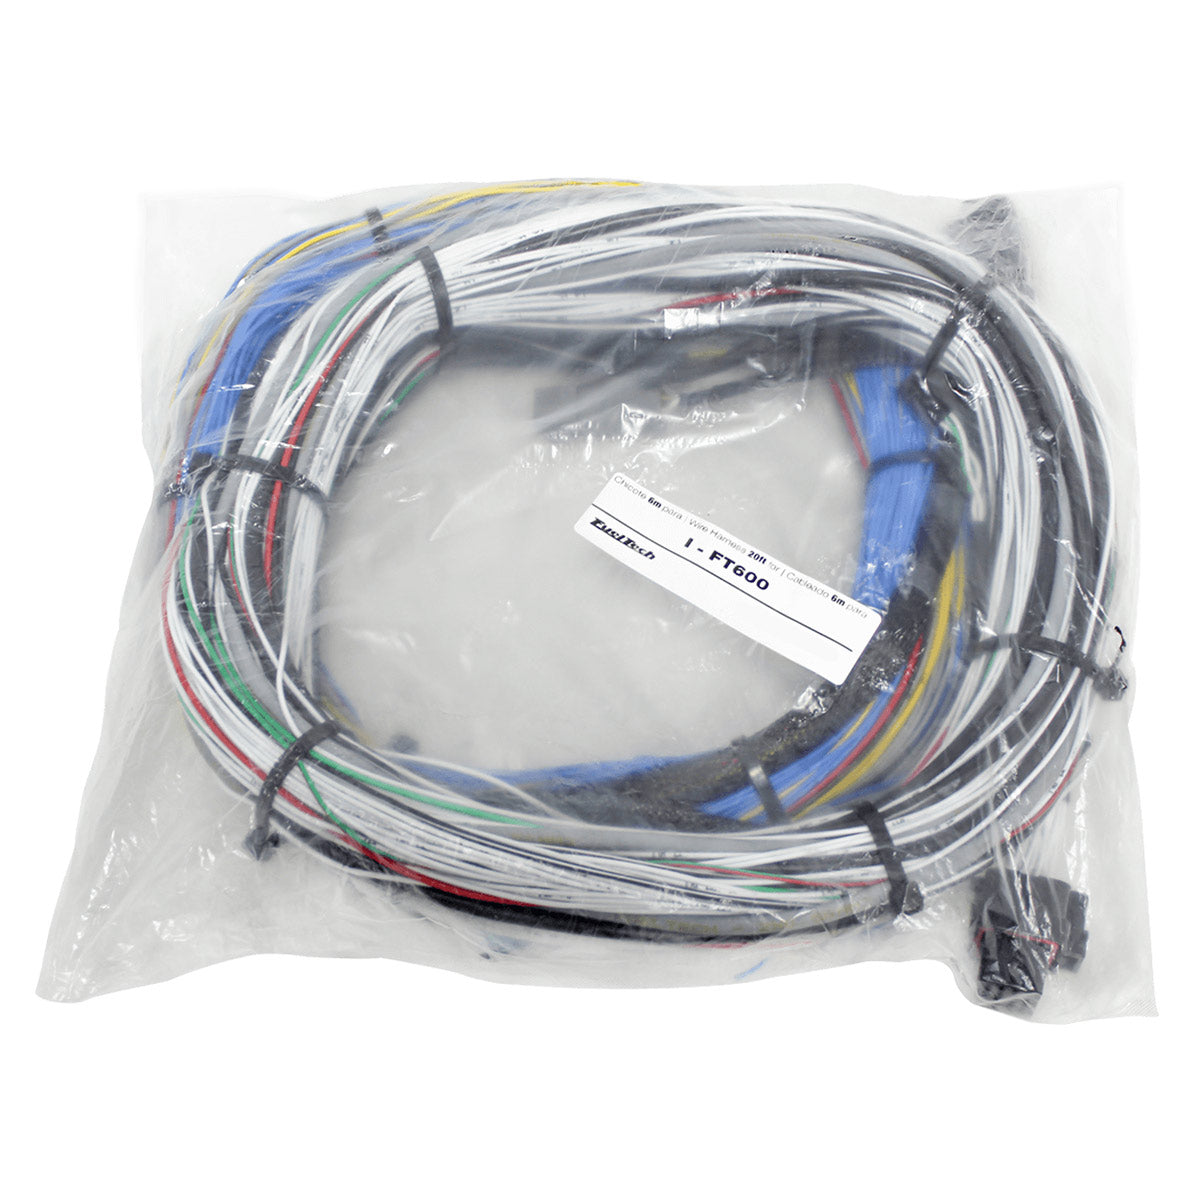 FUELTECH FT600 UNTERMINATED HARNESS